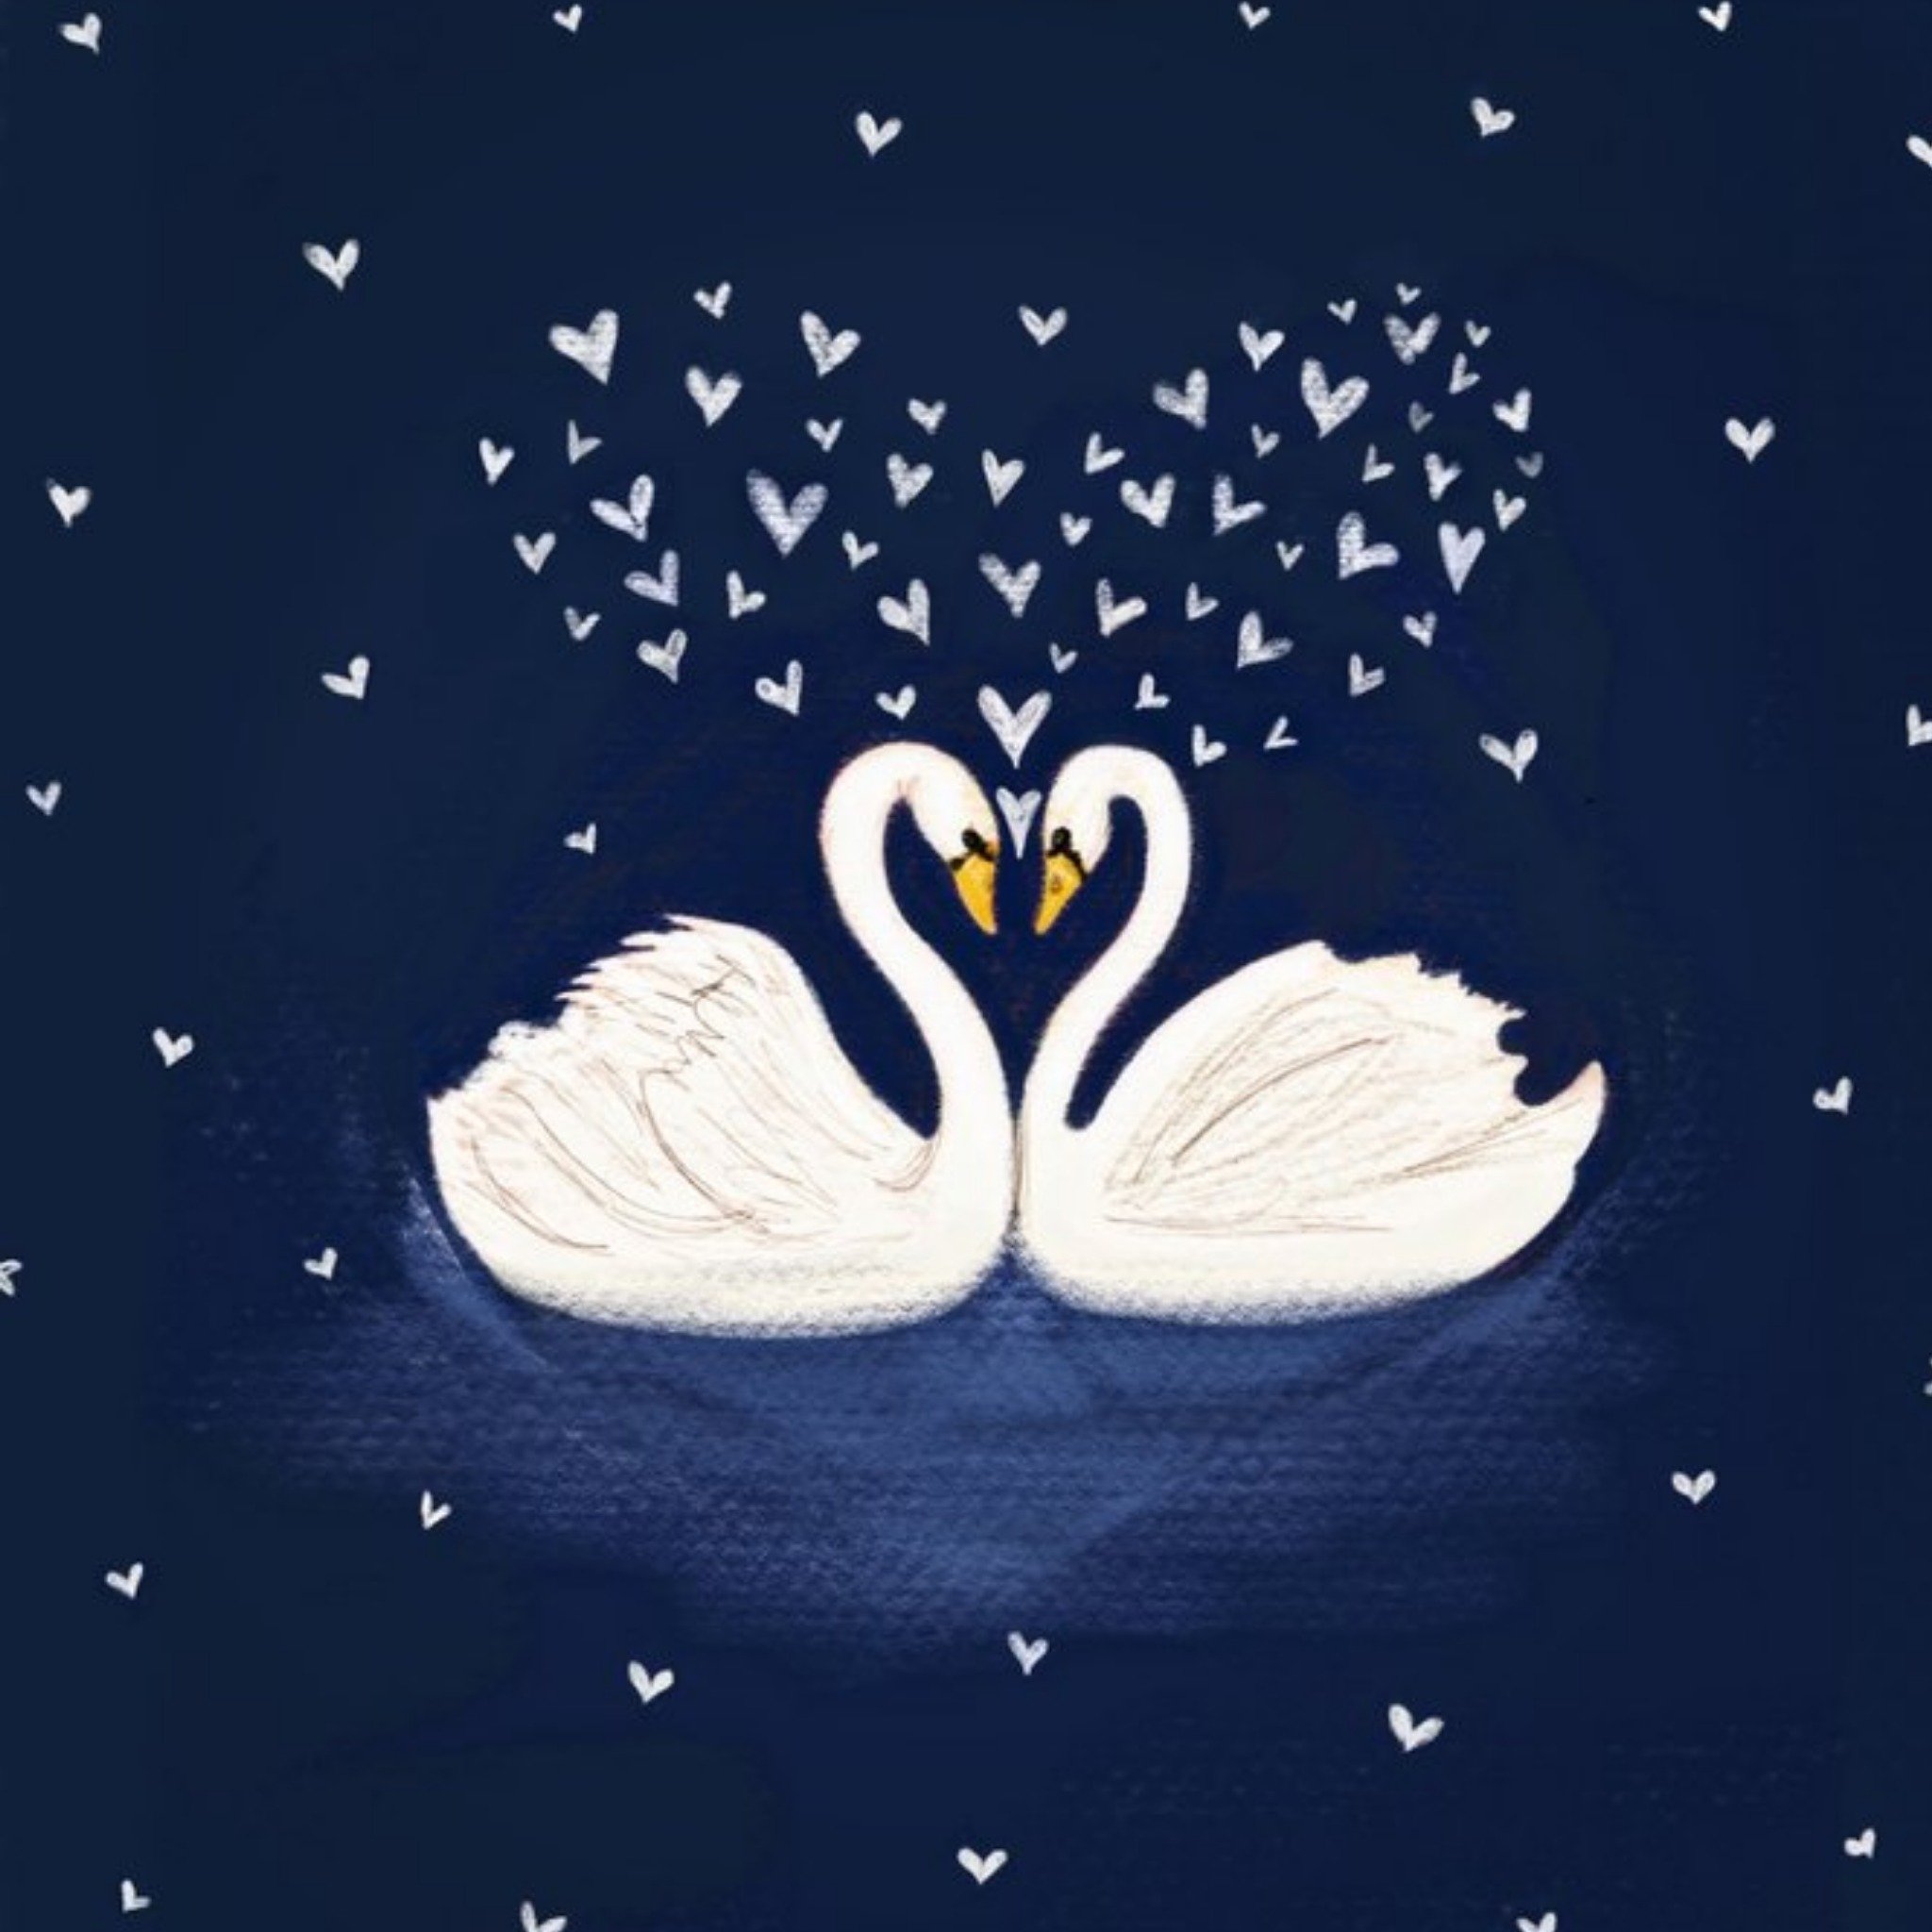 Moonpig Illustration Of Swans Surrounded By Hearts Anniversary Card, Large